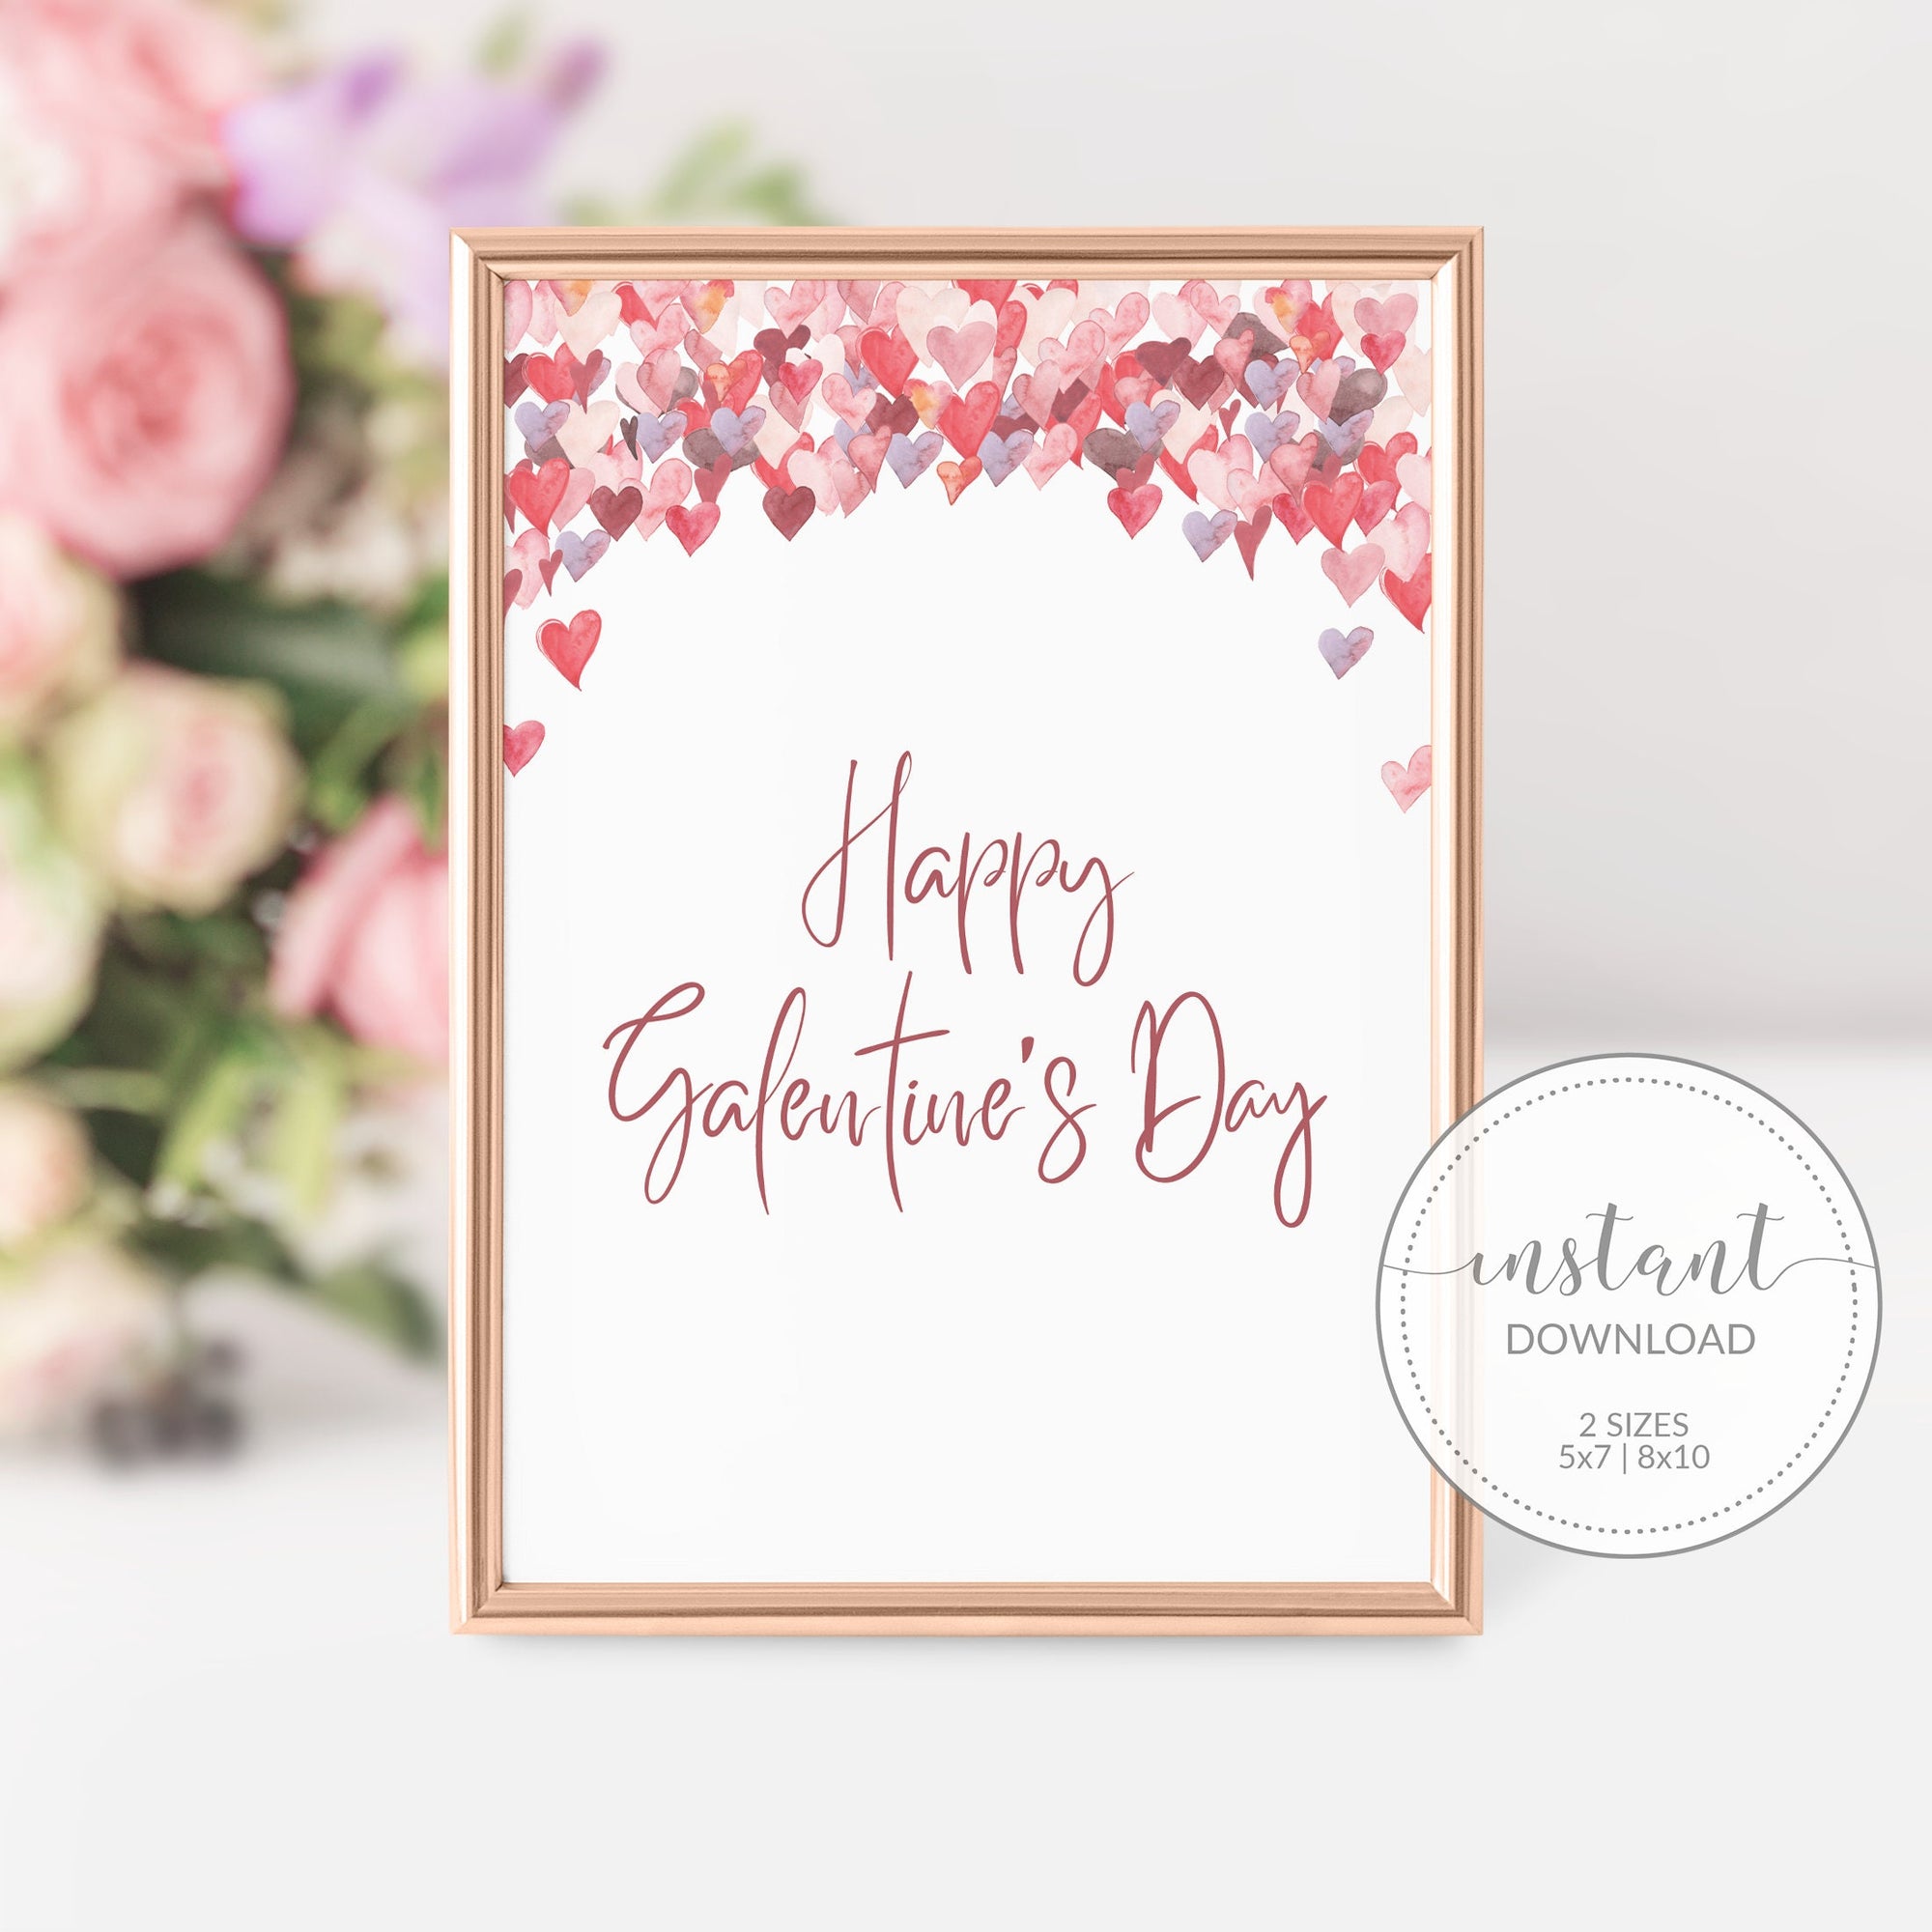 Happy Galentines Day Sign Printable, Galentines Day Decor, Galentines Day Party Decorations, Galentines Party Sign, INSTANT DOWNLOAD - VH100